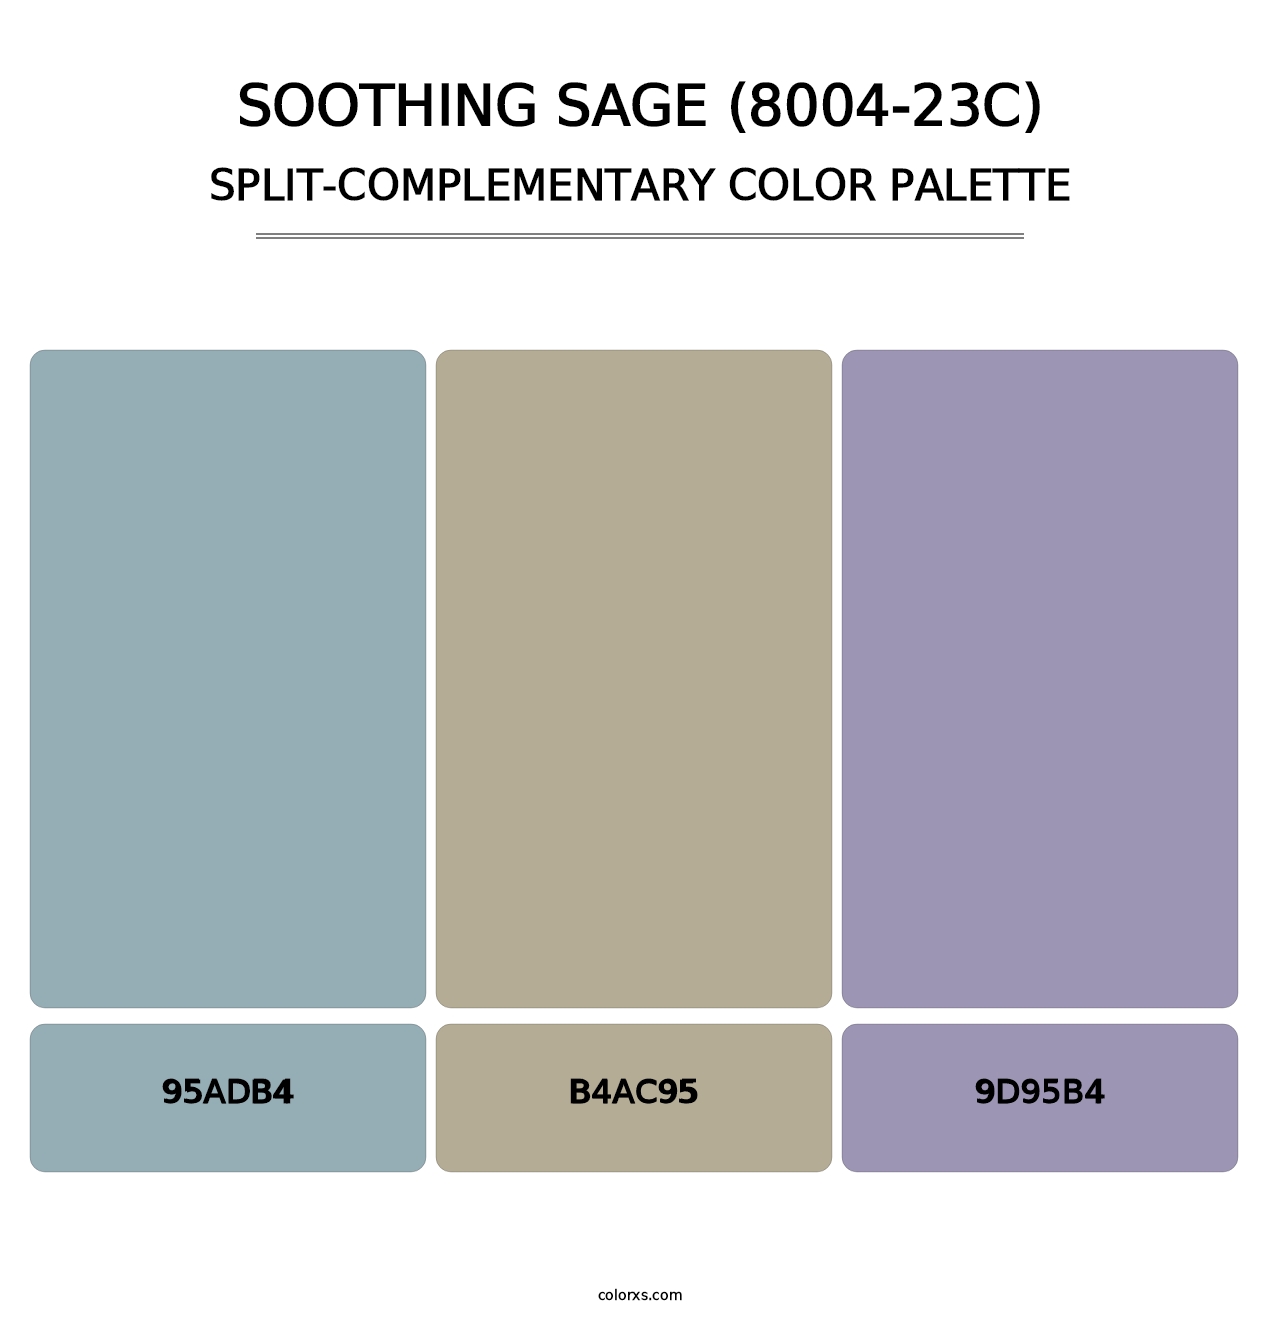 Soothing Sage (8004-23C) - Split-Complementary Color Palette